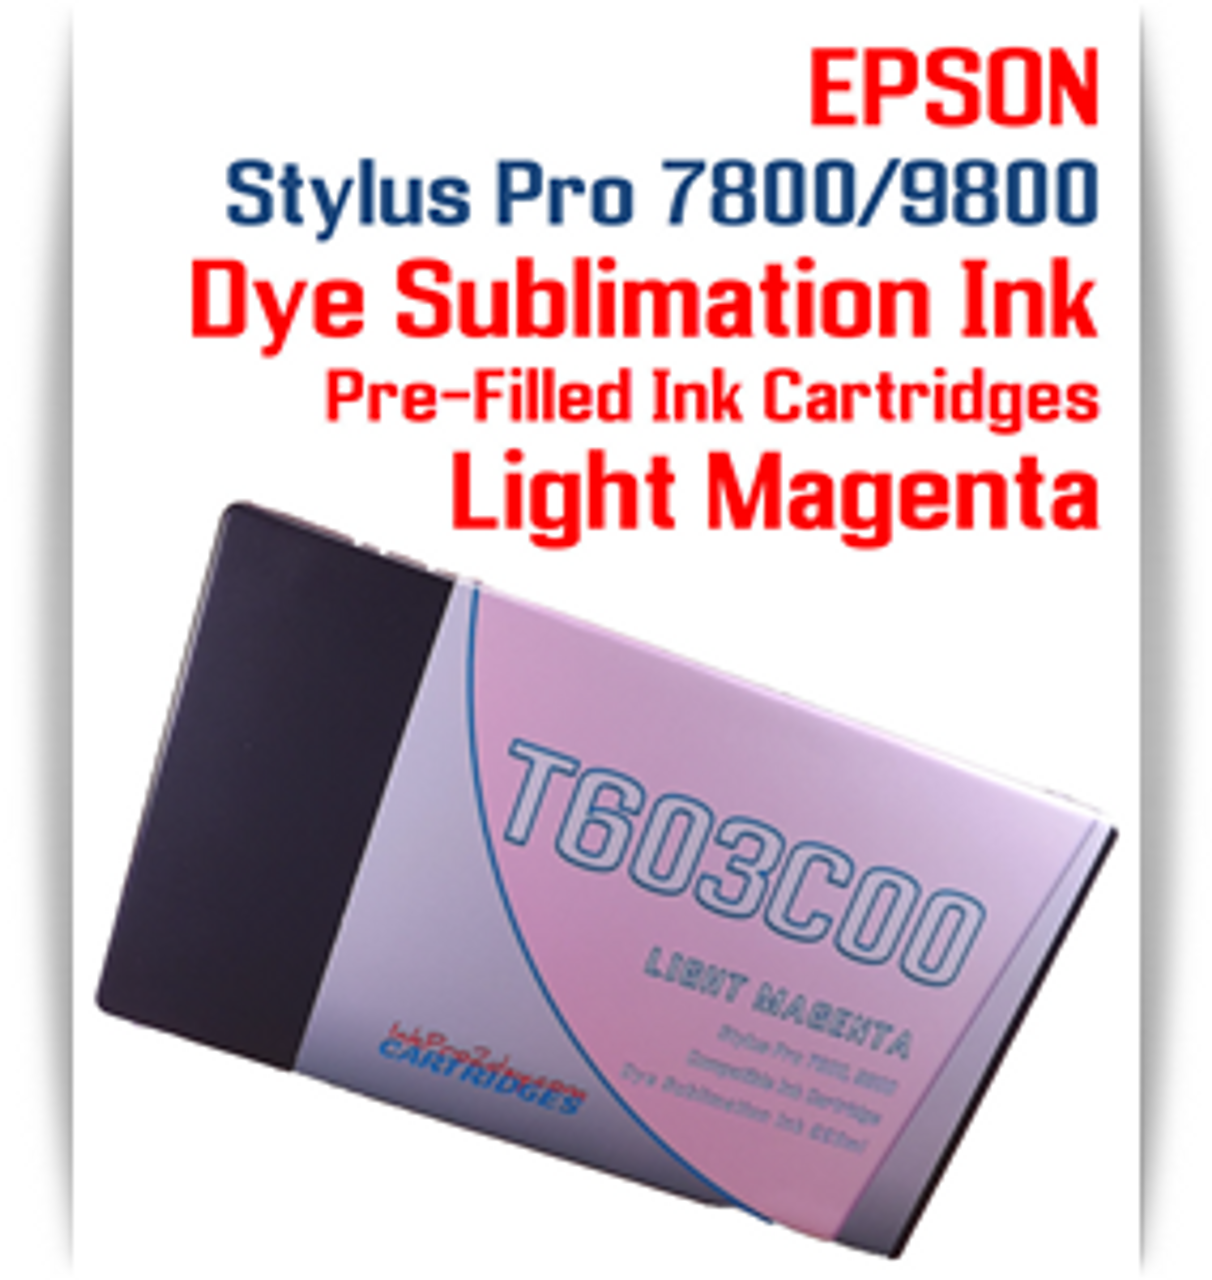 Light Magenta Epson Stylus Pro 7800/9800 Pre-Filled with Dye Sublimation Ink Cartridge 220ml each